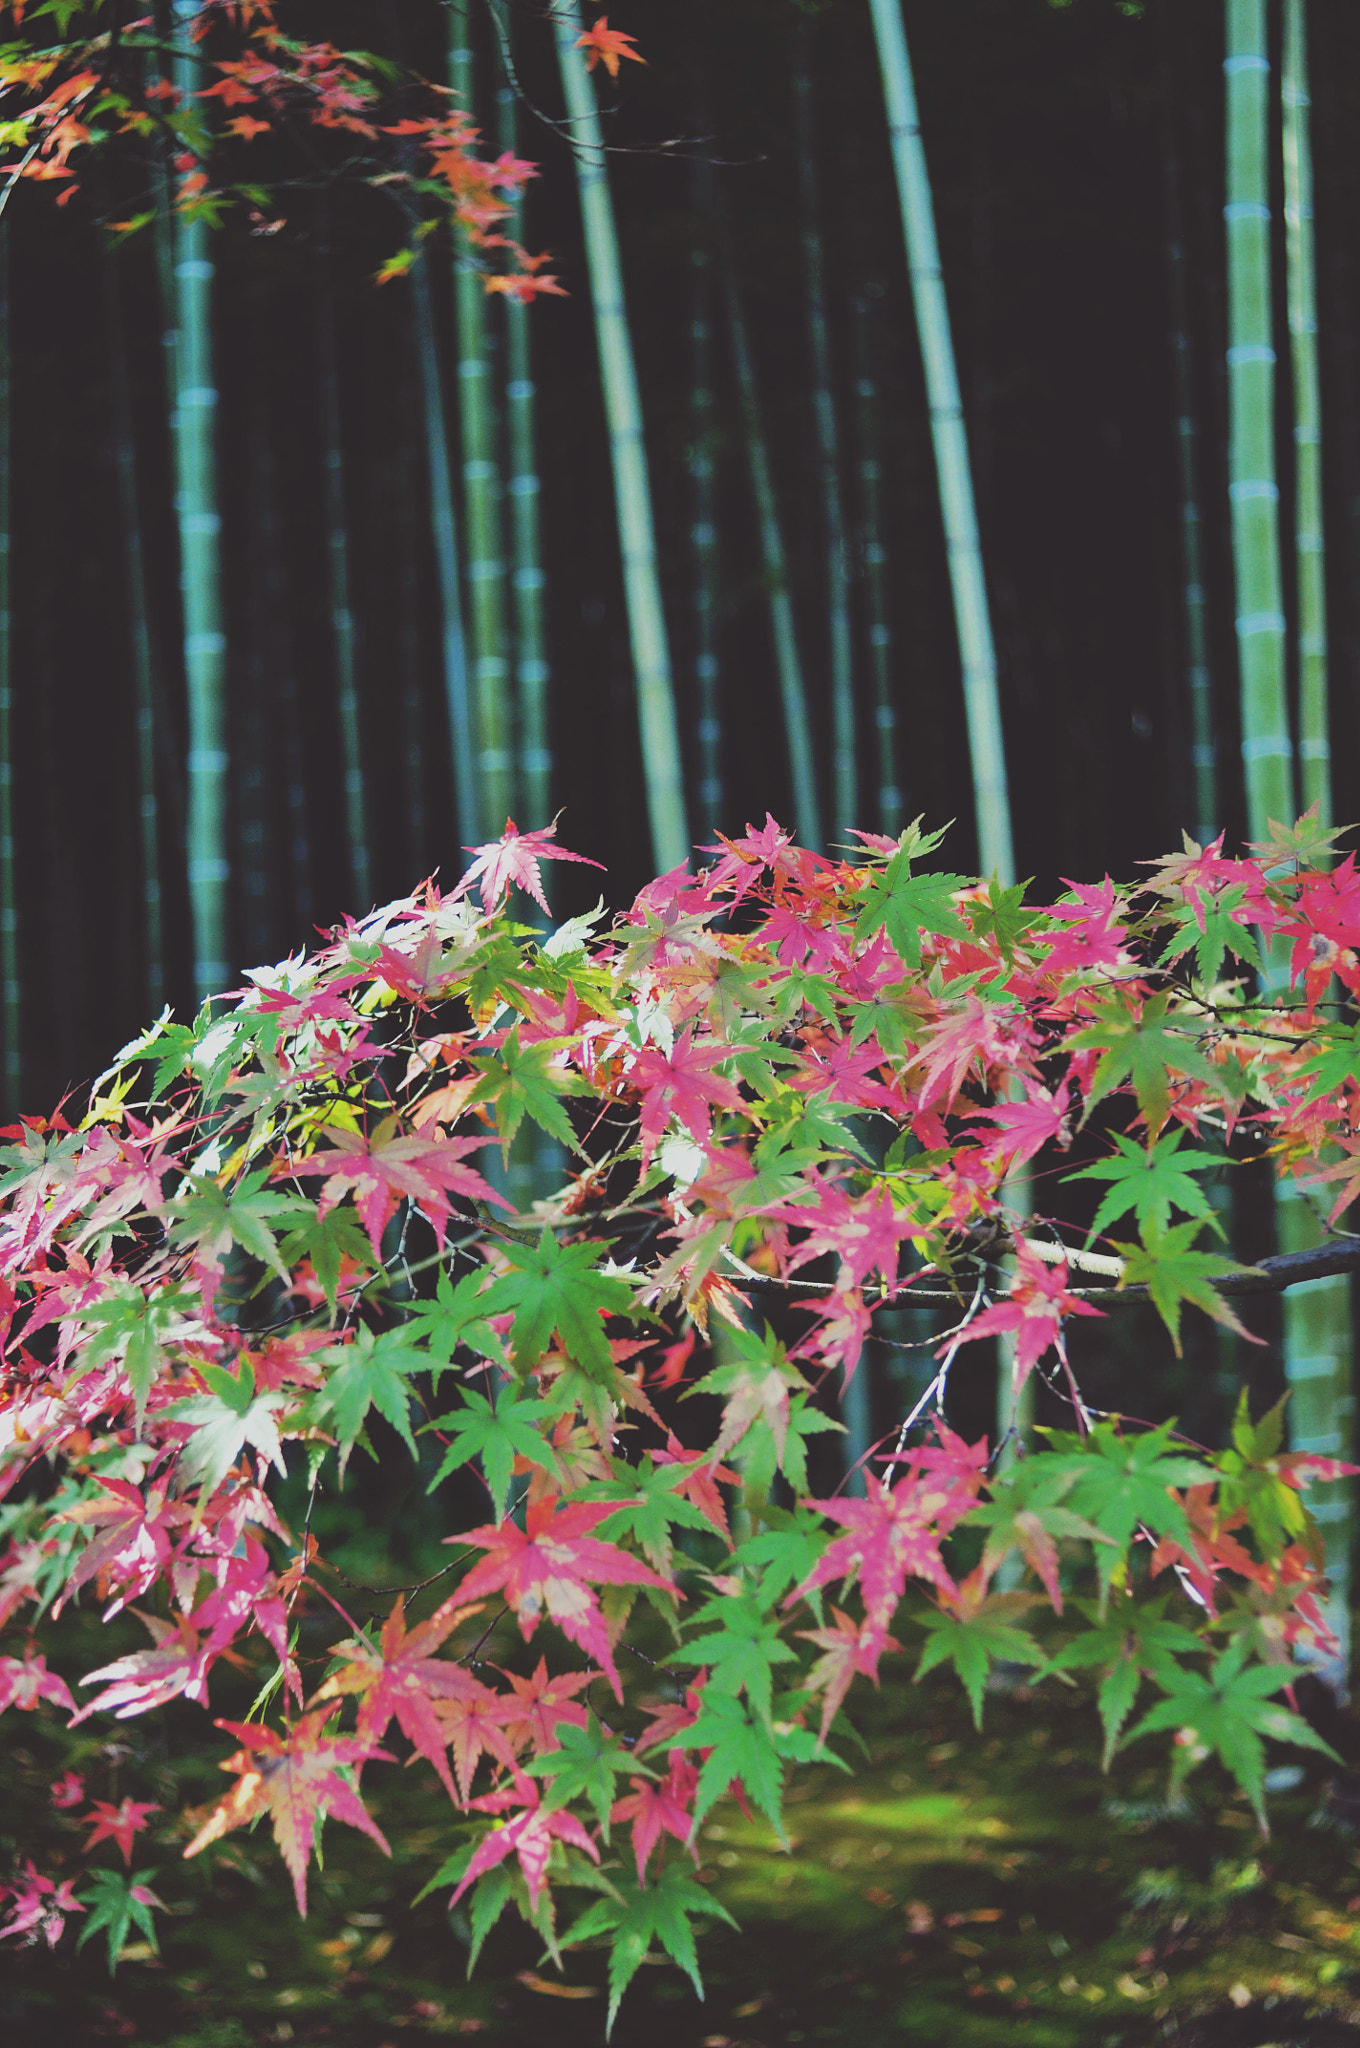 Nikon D90 + AF Nikkor 28mm f/2.8 sample photo. Autumn leaves and bamboo photography